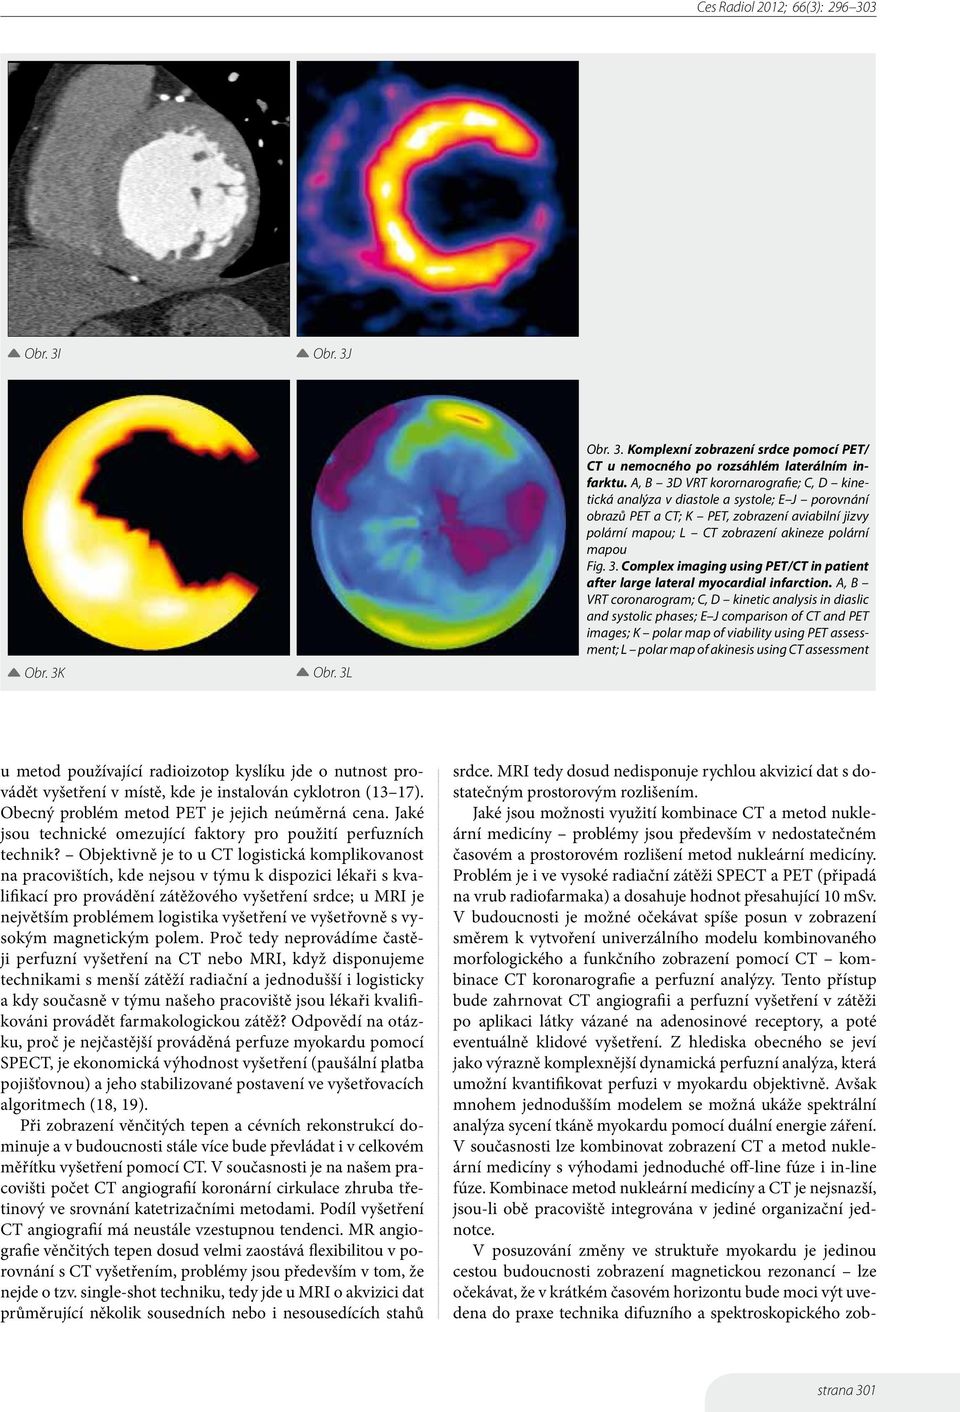 A, B VRT coronarogram; C, D kinetic analysis in diaslic and systolic phases; E J comparison of CT and PET images; K polar map of viability using PET assessment; L polar map of akinesis using CT